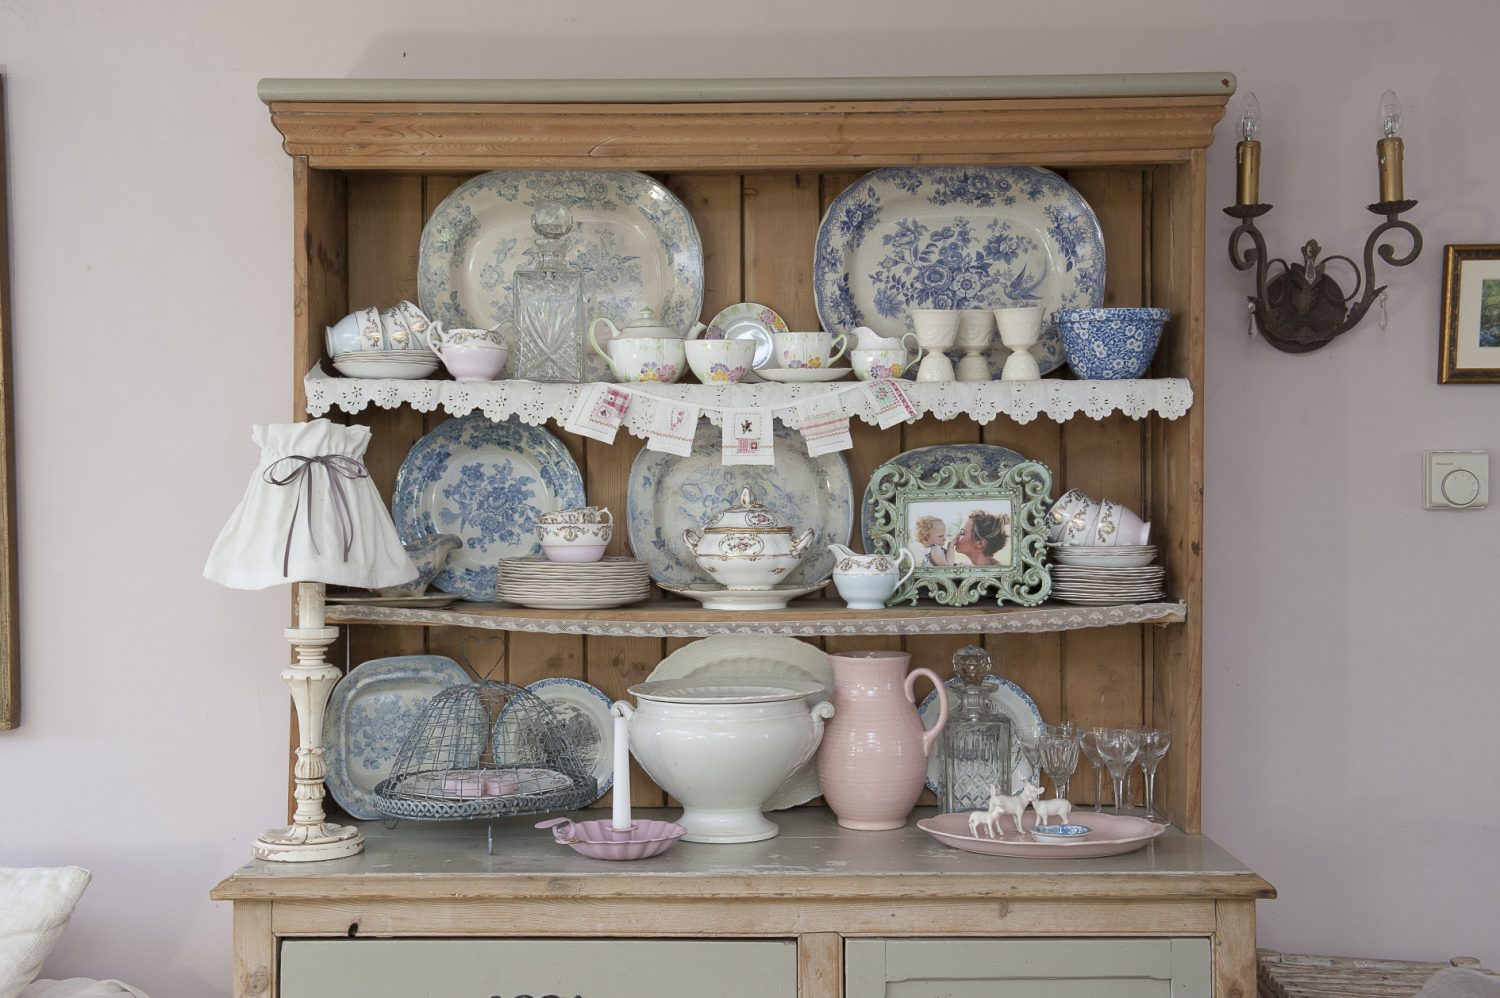 A collection of pretty crockery on a farmhouse dresser completes the look in the living room